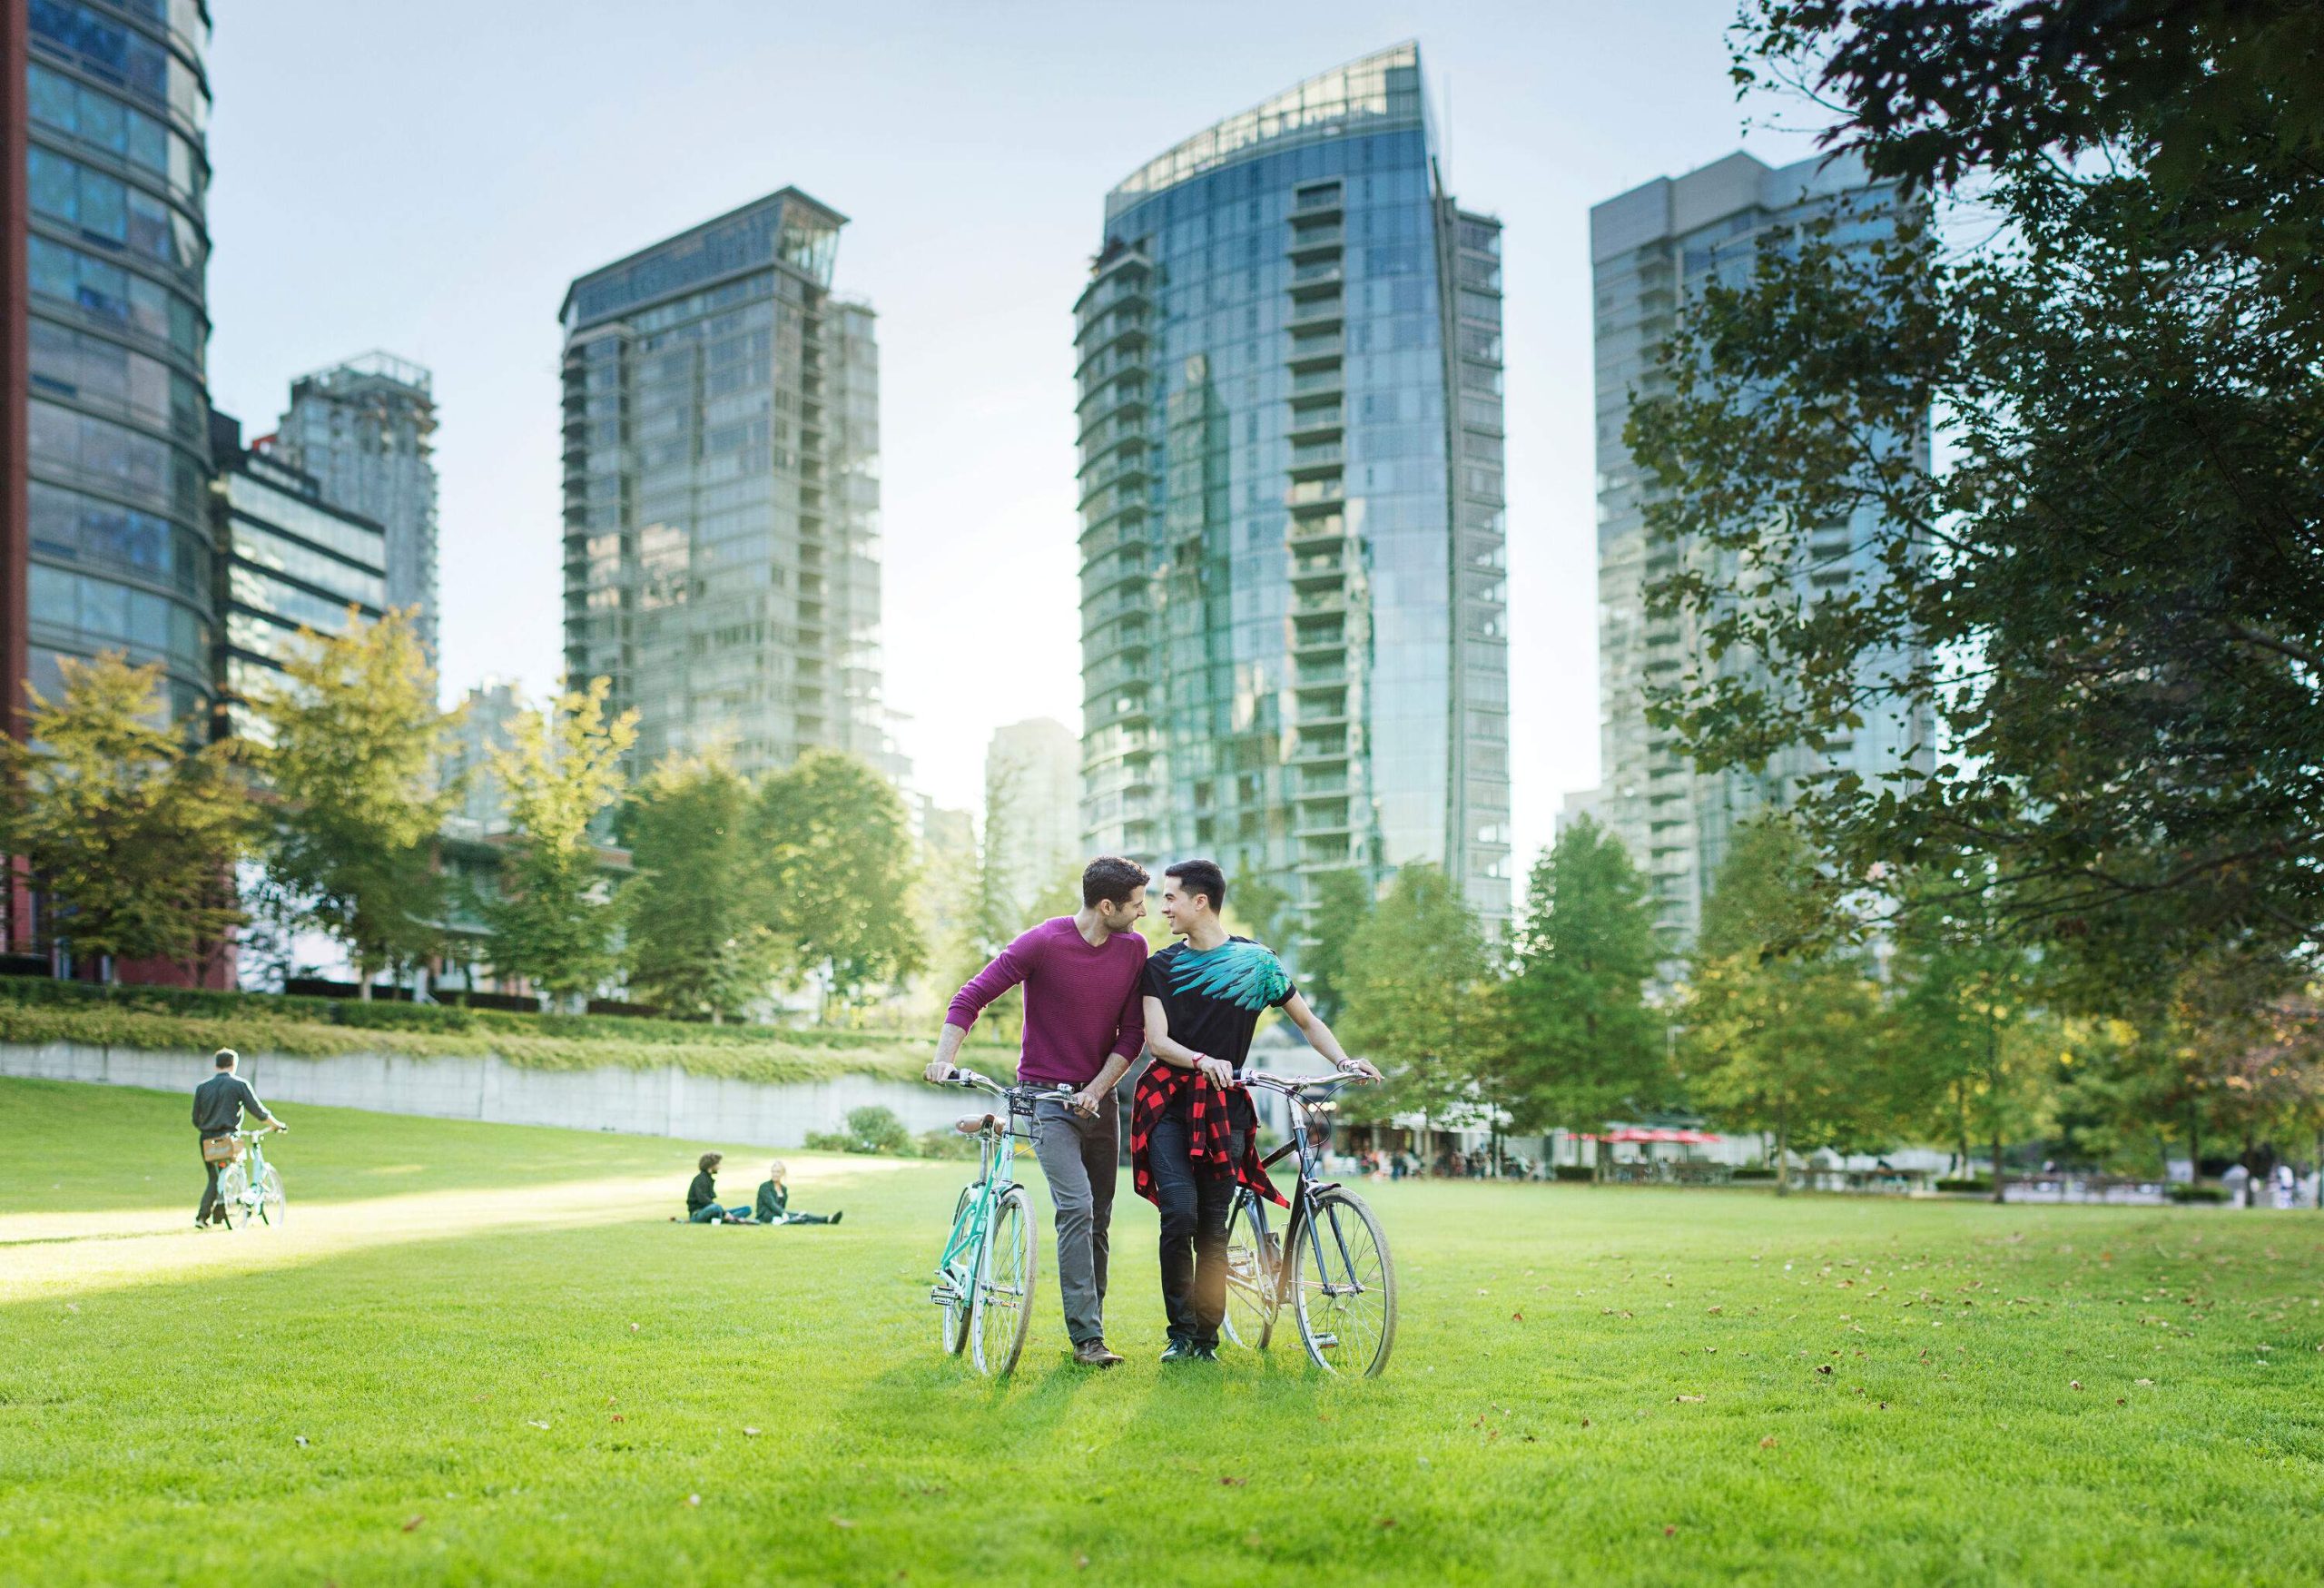 Two cyclists amble side by side, pushing their bicycles through a lush park, as the towering skyscrapers in the background create a striking urban contrast.